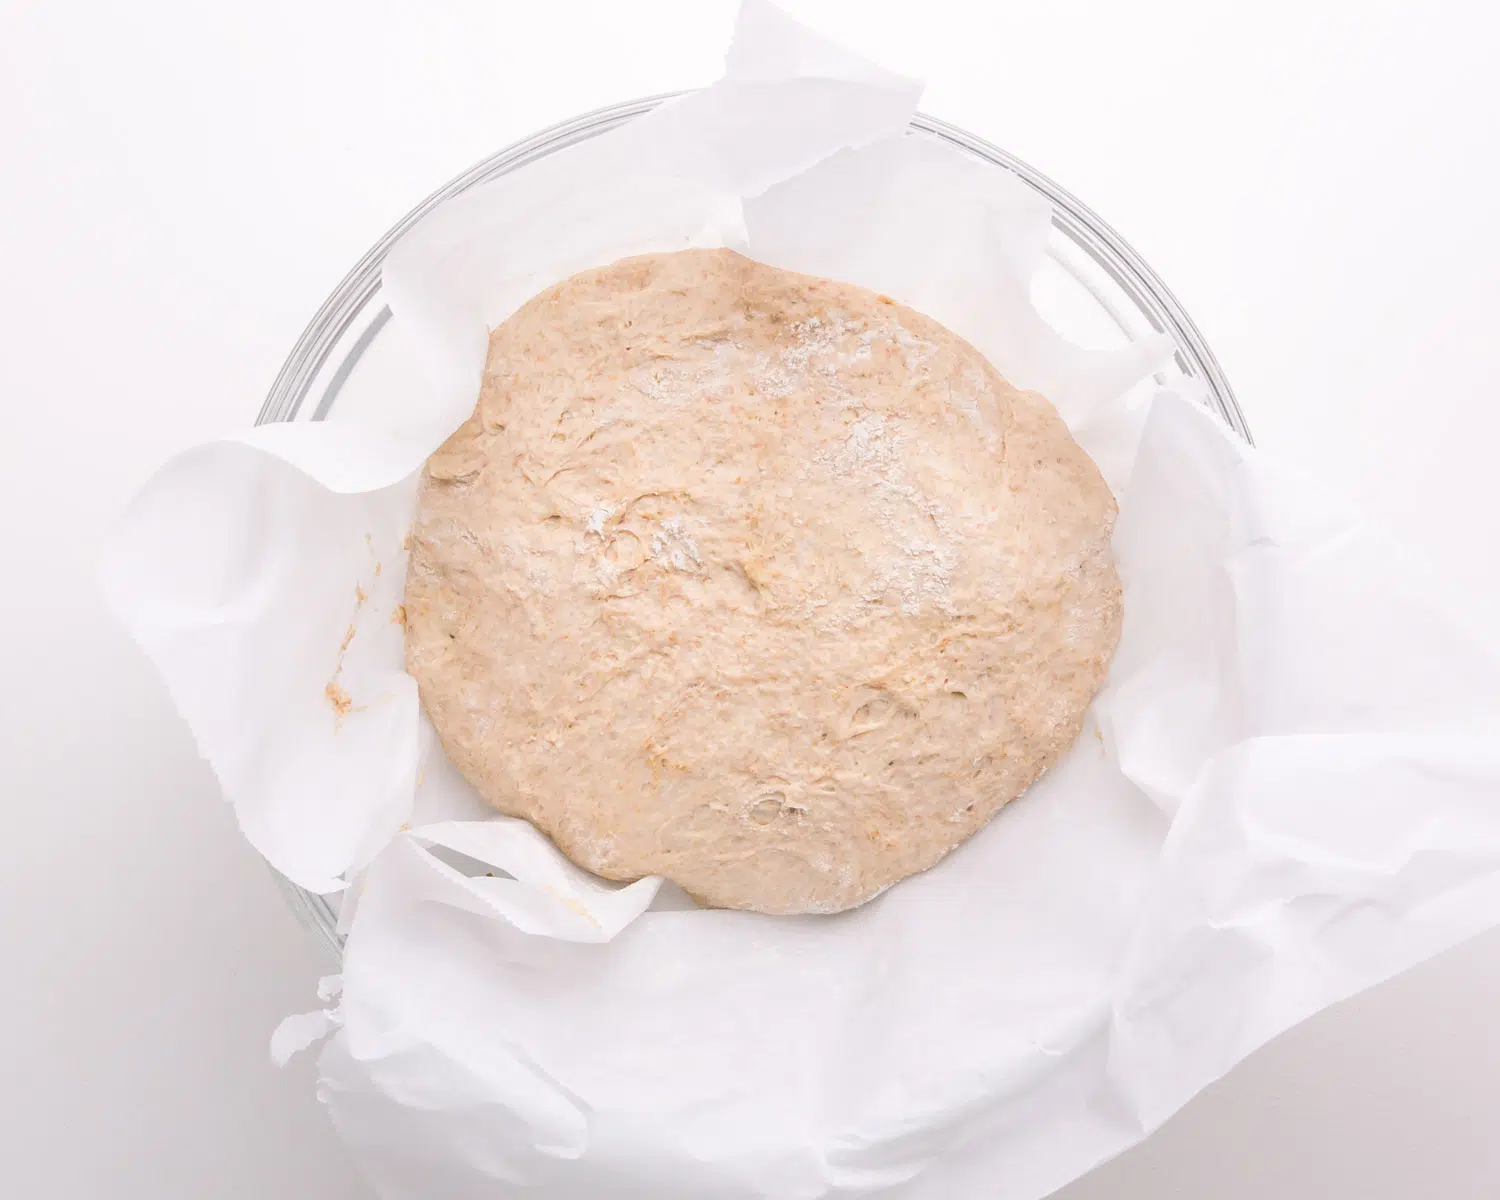 Dough sits on parchment paper, resting in a glass bowl.